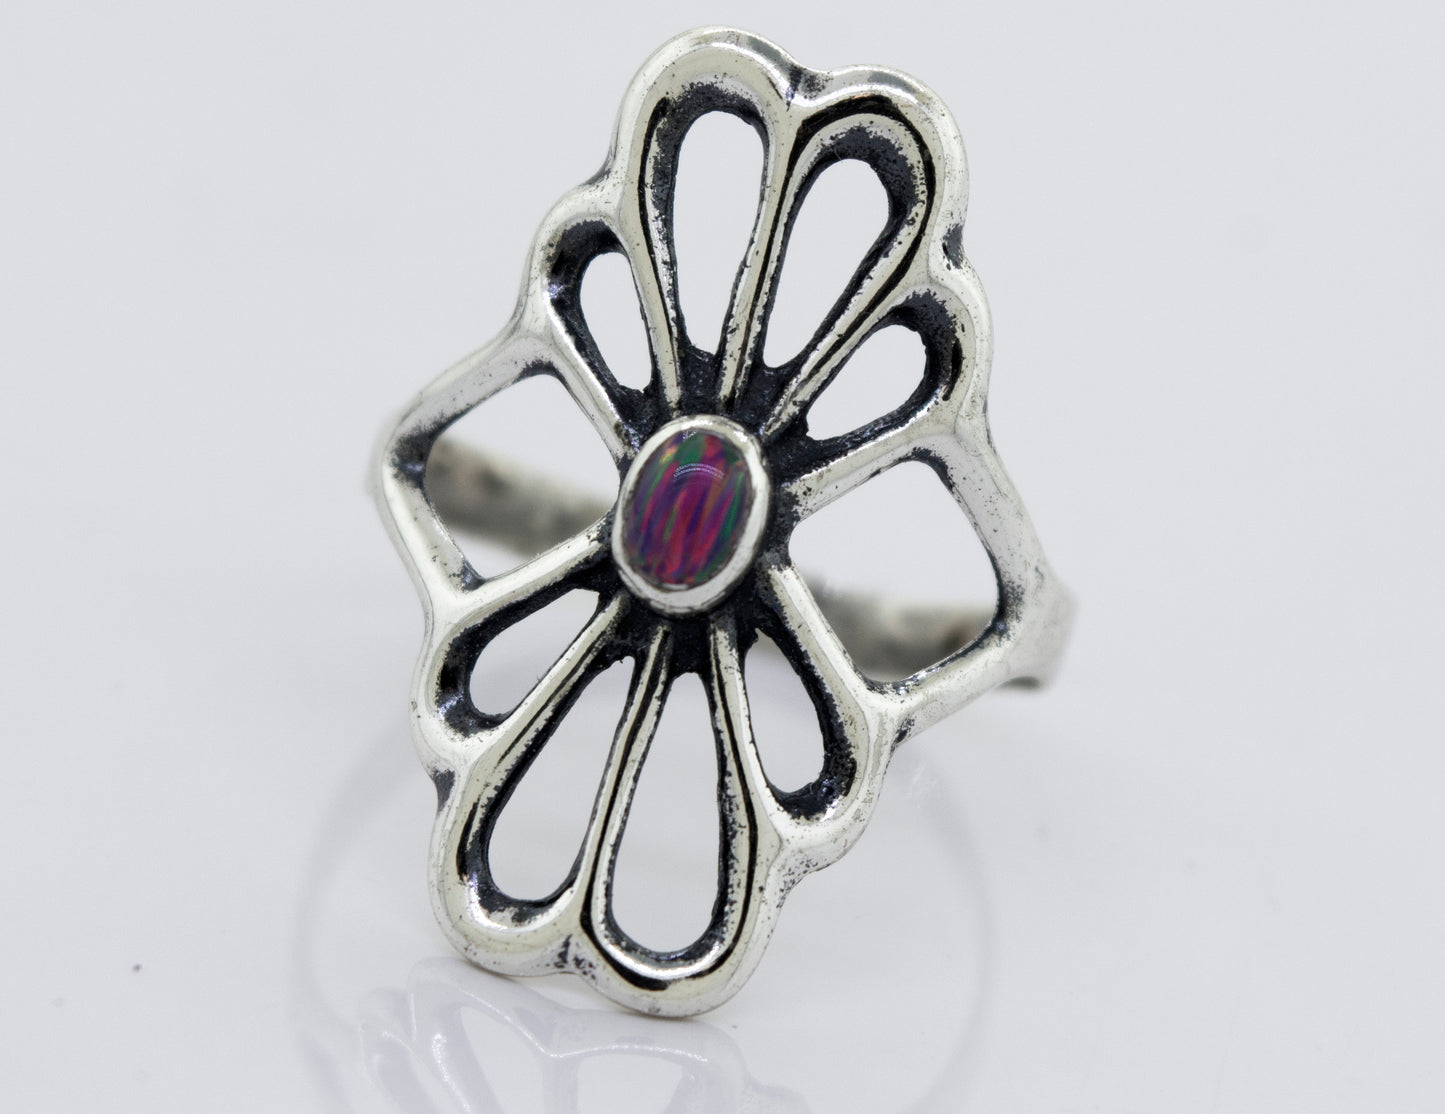 A handcrafted Super Silver American Made Flower Ring with an oval opal stone in the center.